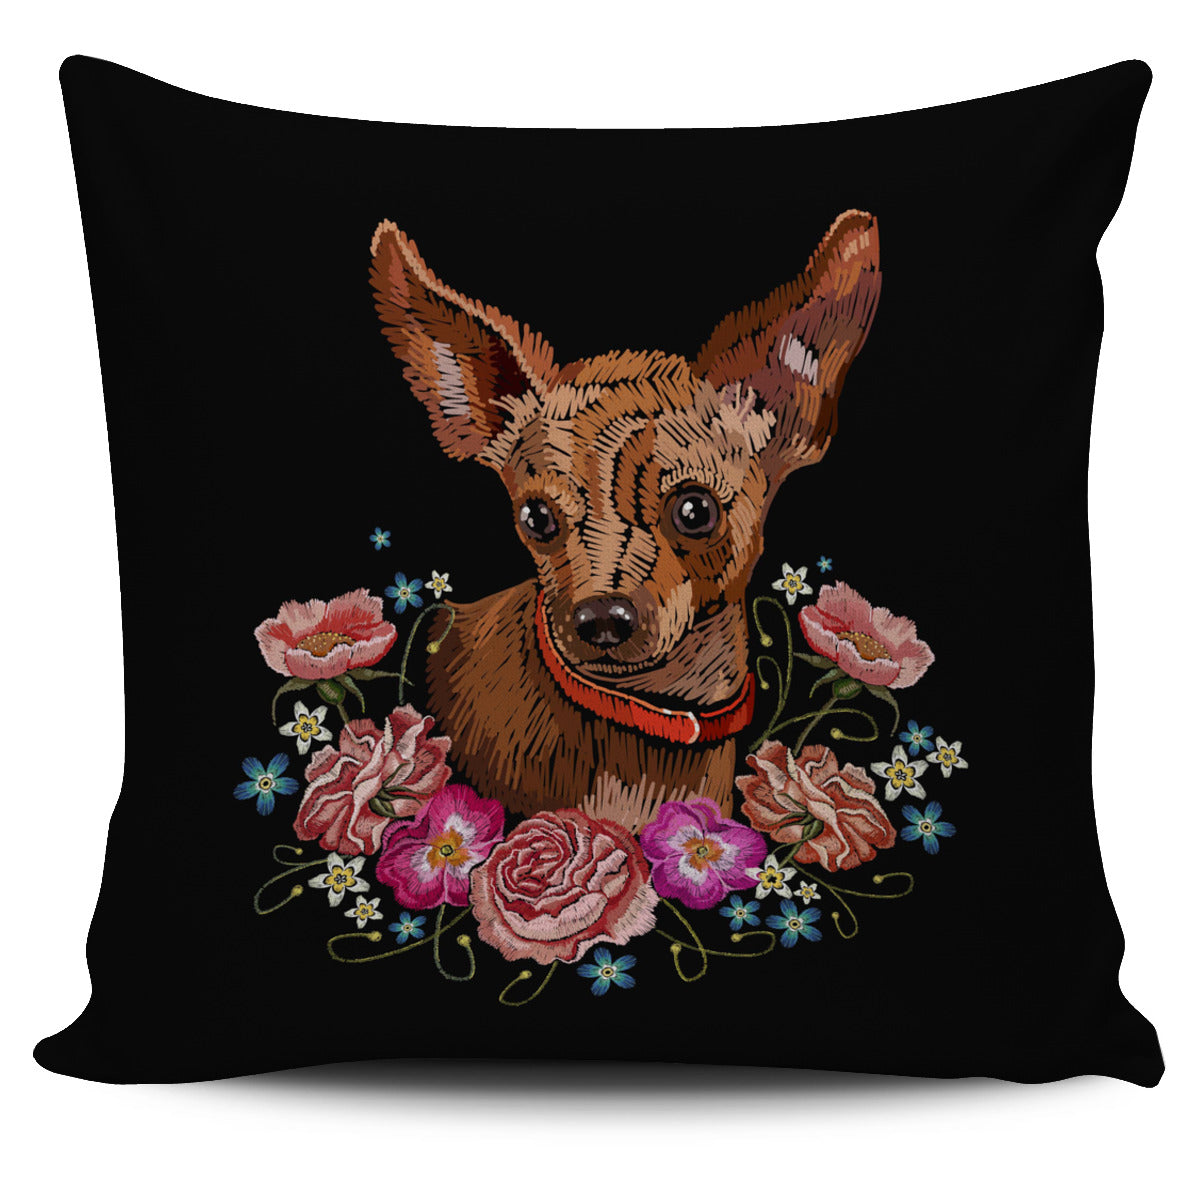 Embroidery Chihuahua Pillow Cover